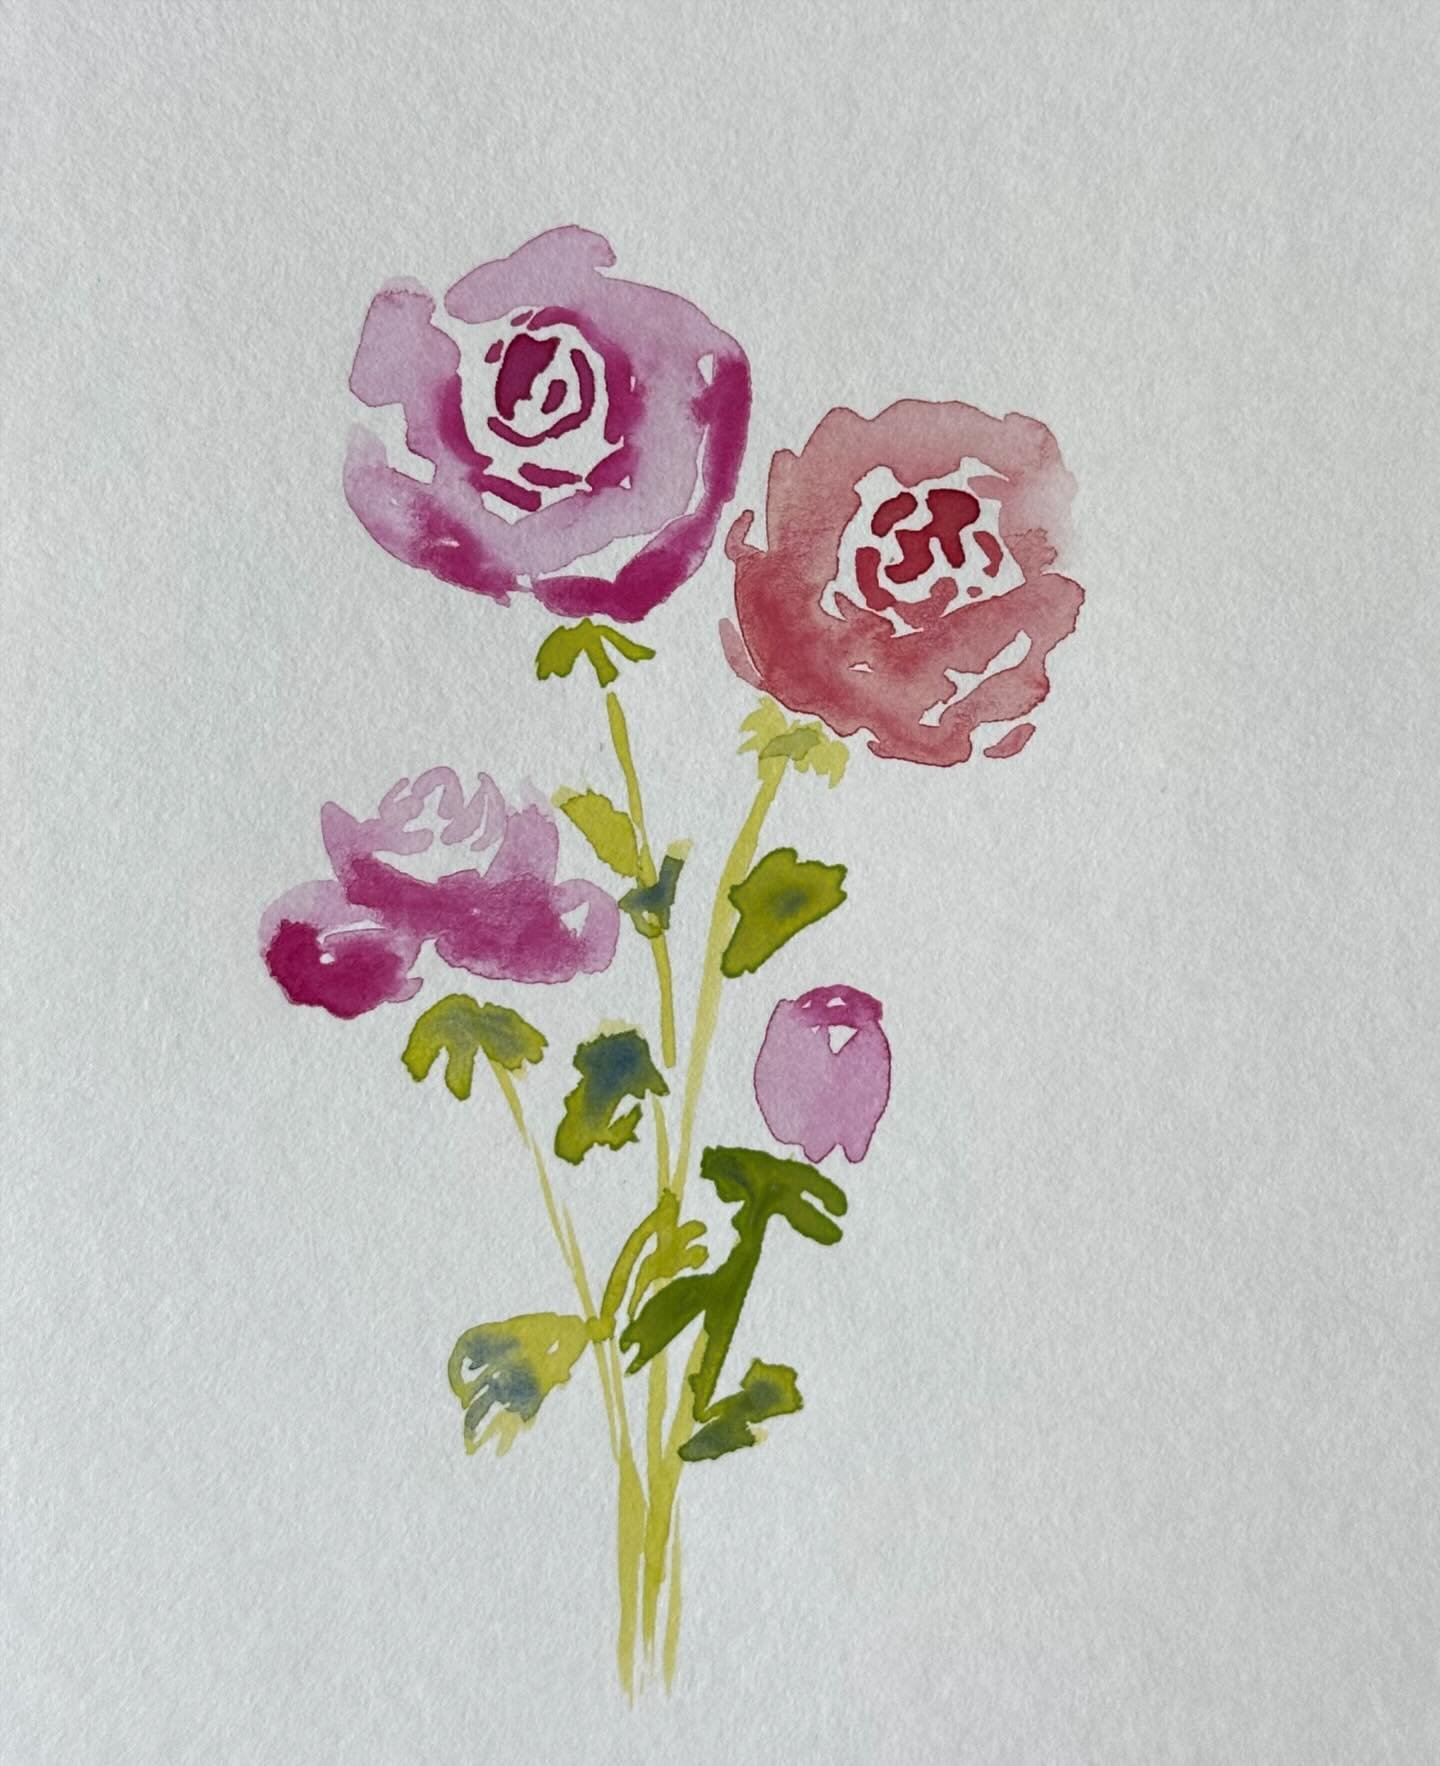 I painted some simple roses on a postcard. 

#letsmakeartwatercolor #letsmakeart #watercolor #watercolorpainting